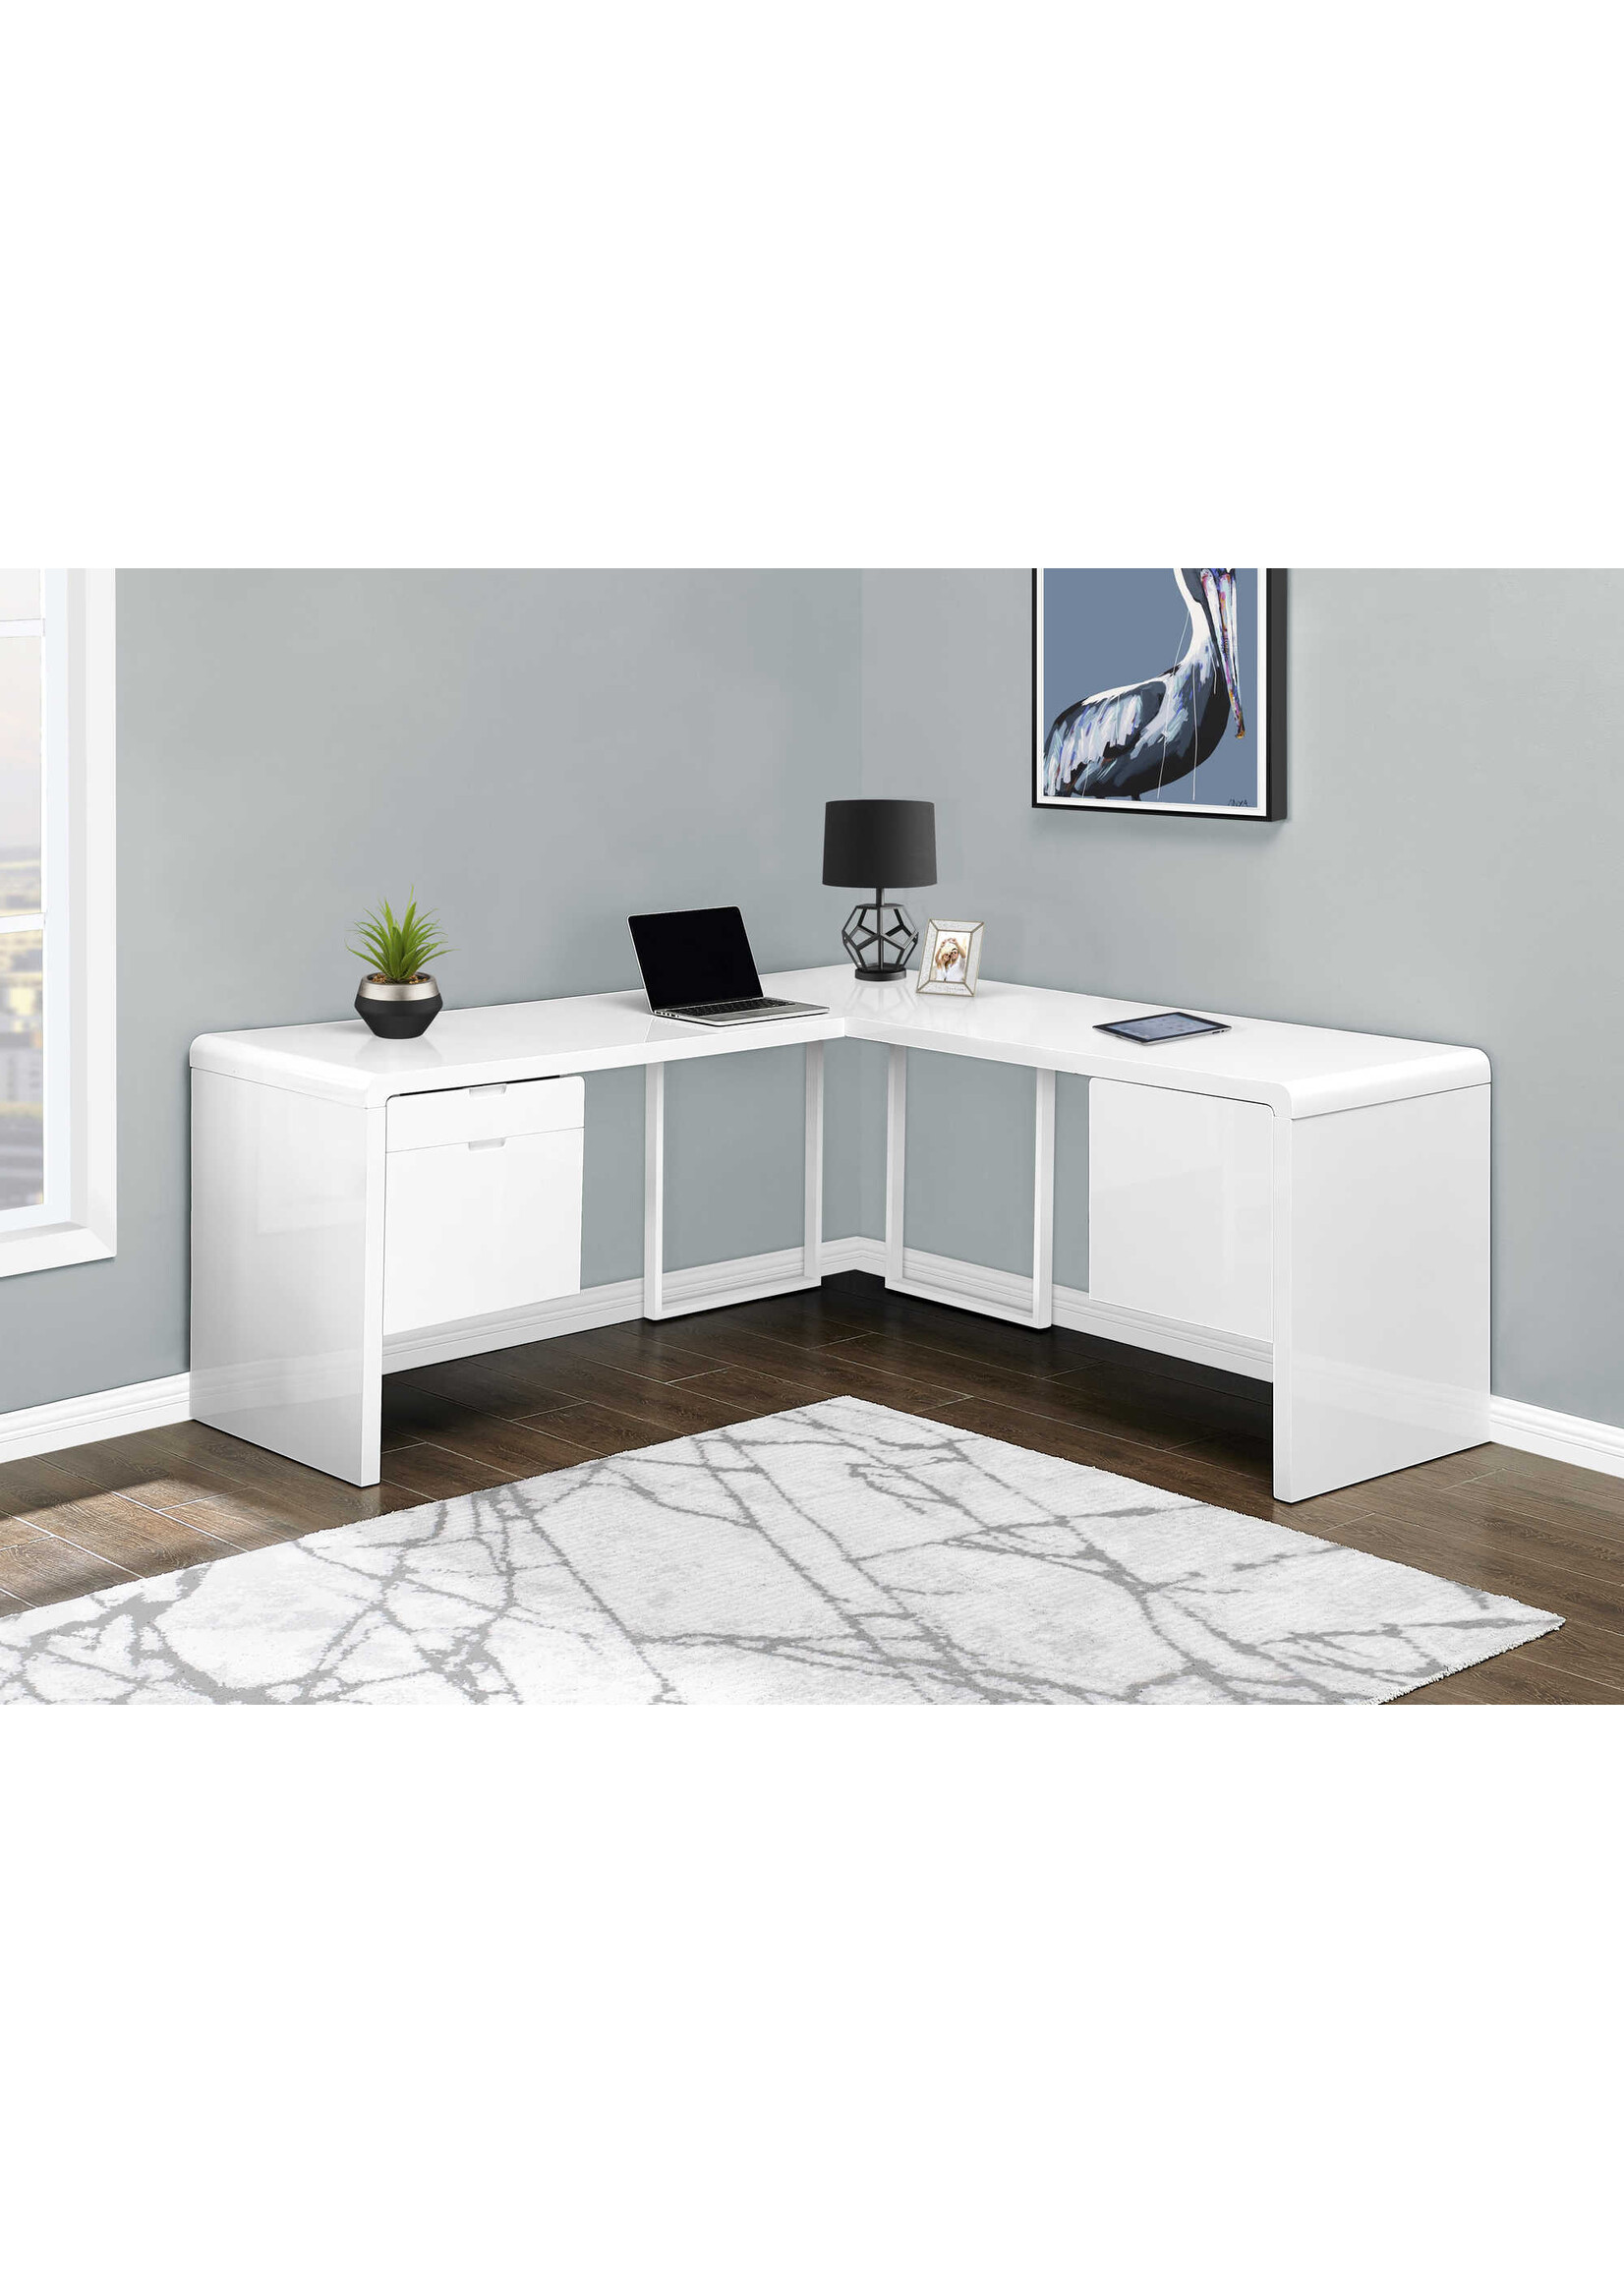 COMPUTER DESK - 72"L / HIGH GLOSSY WHITE LEFT/ RIGHT FACE